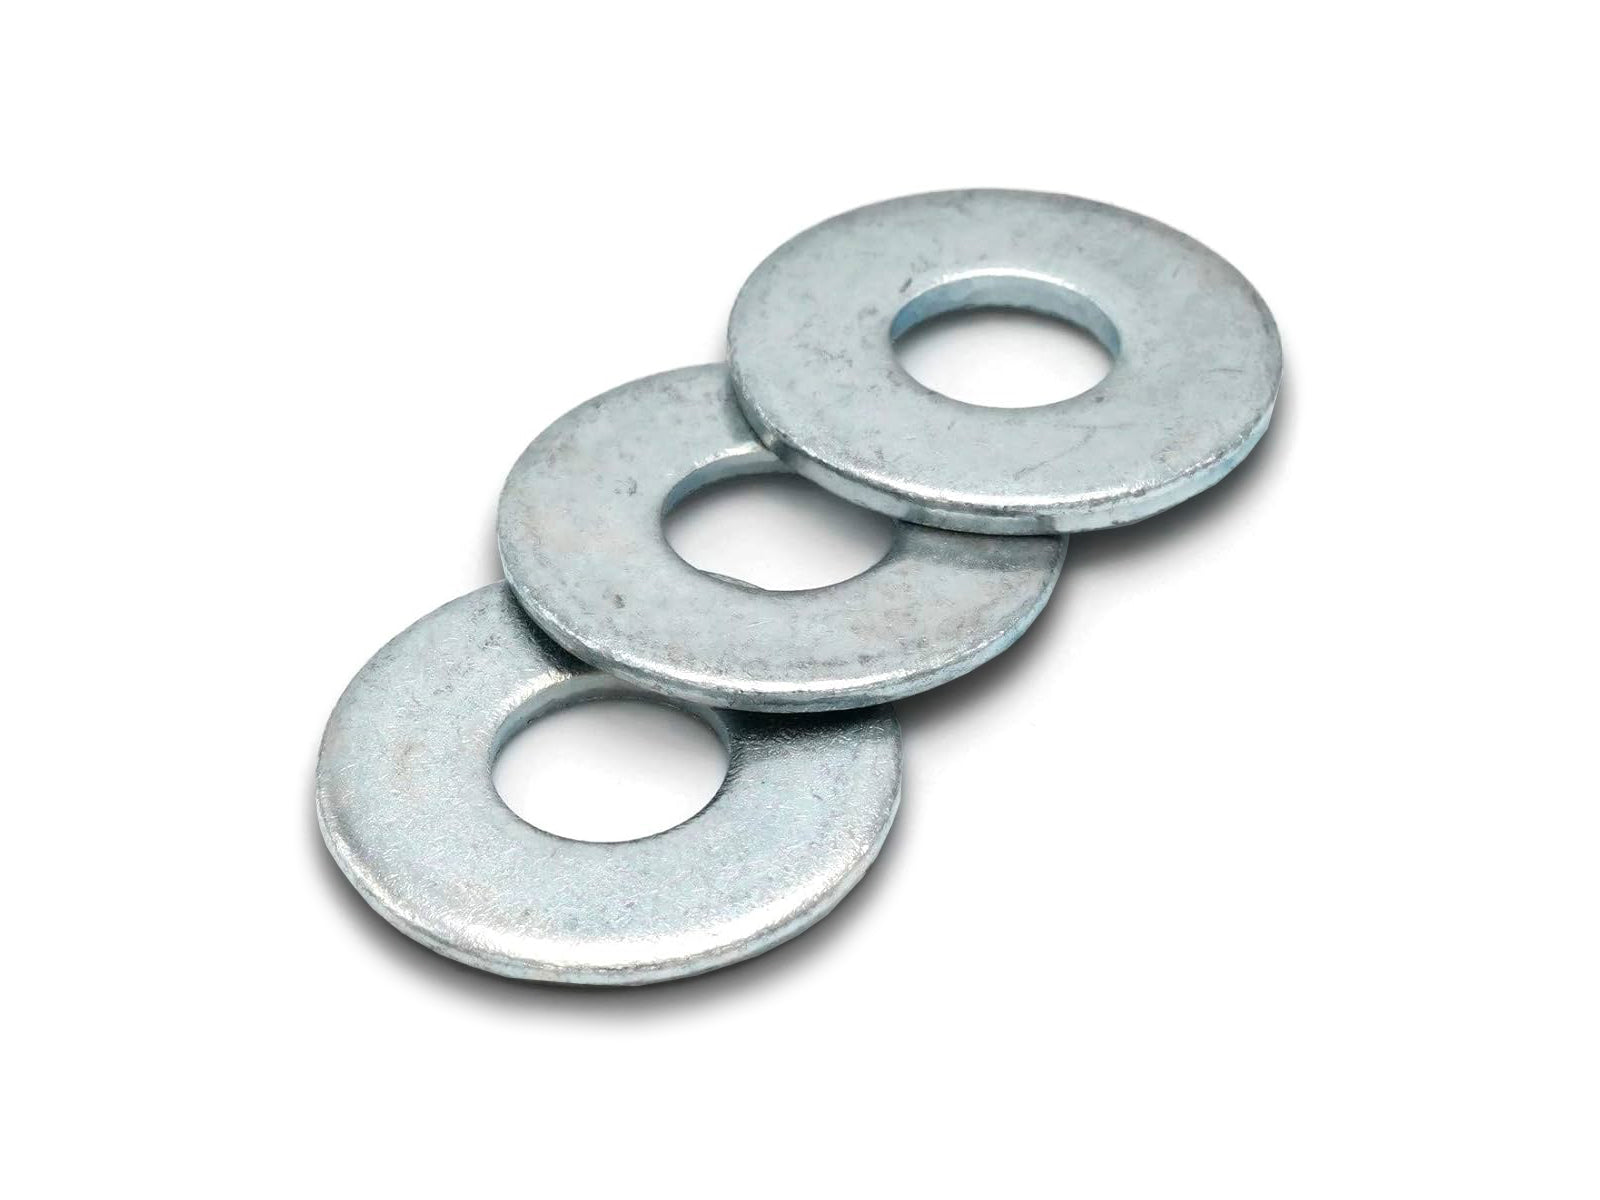 Image shows 3 washers stacked ontop of eachother on white background